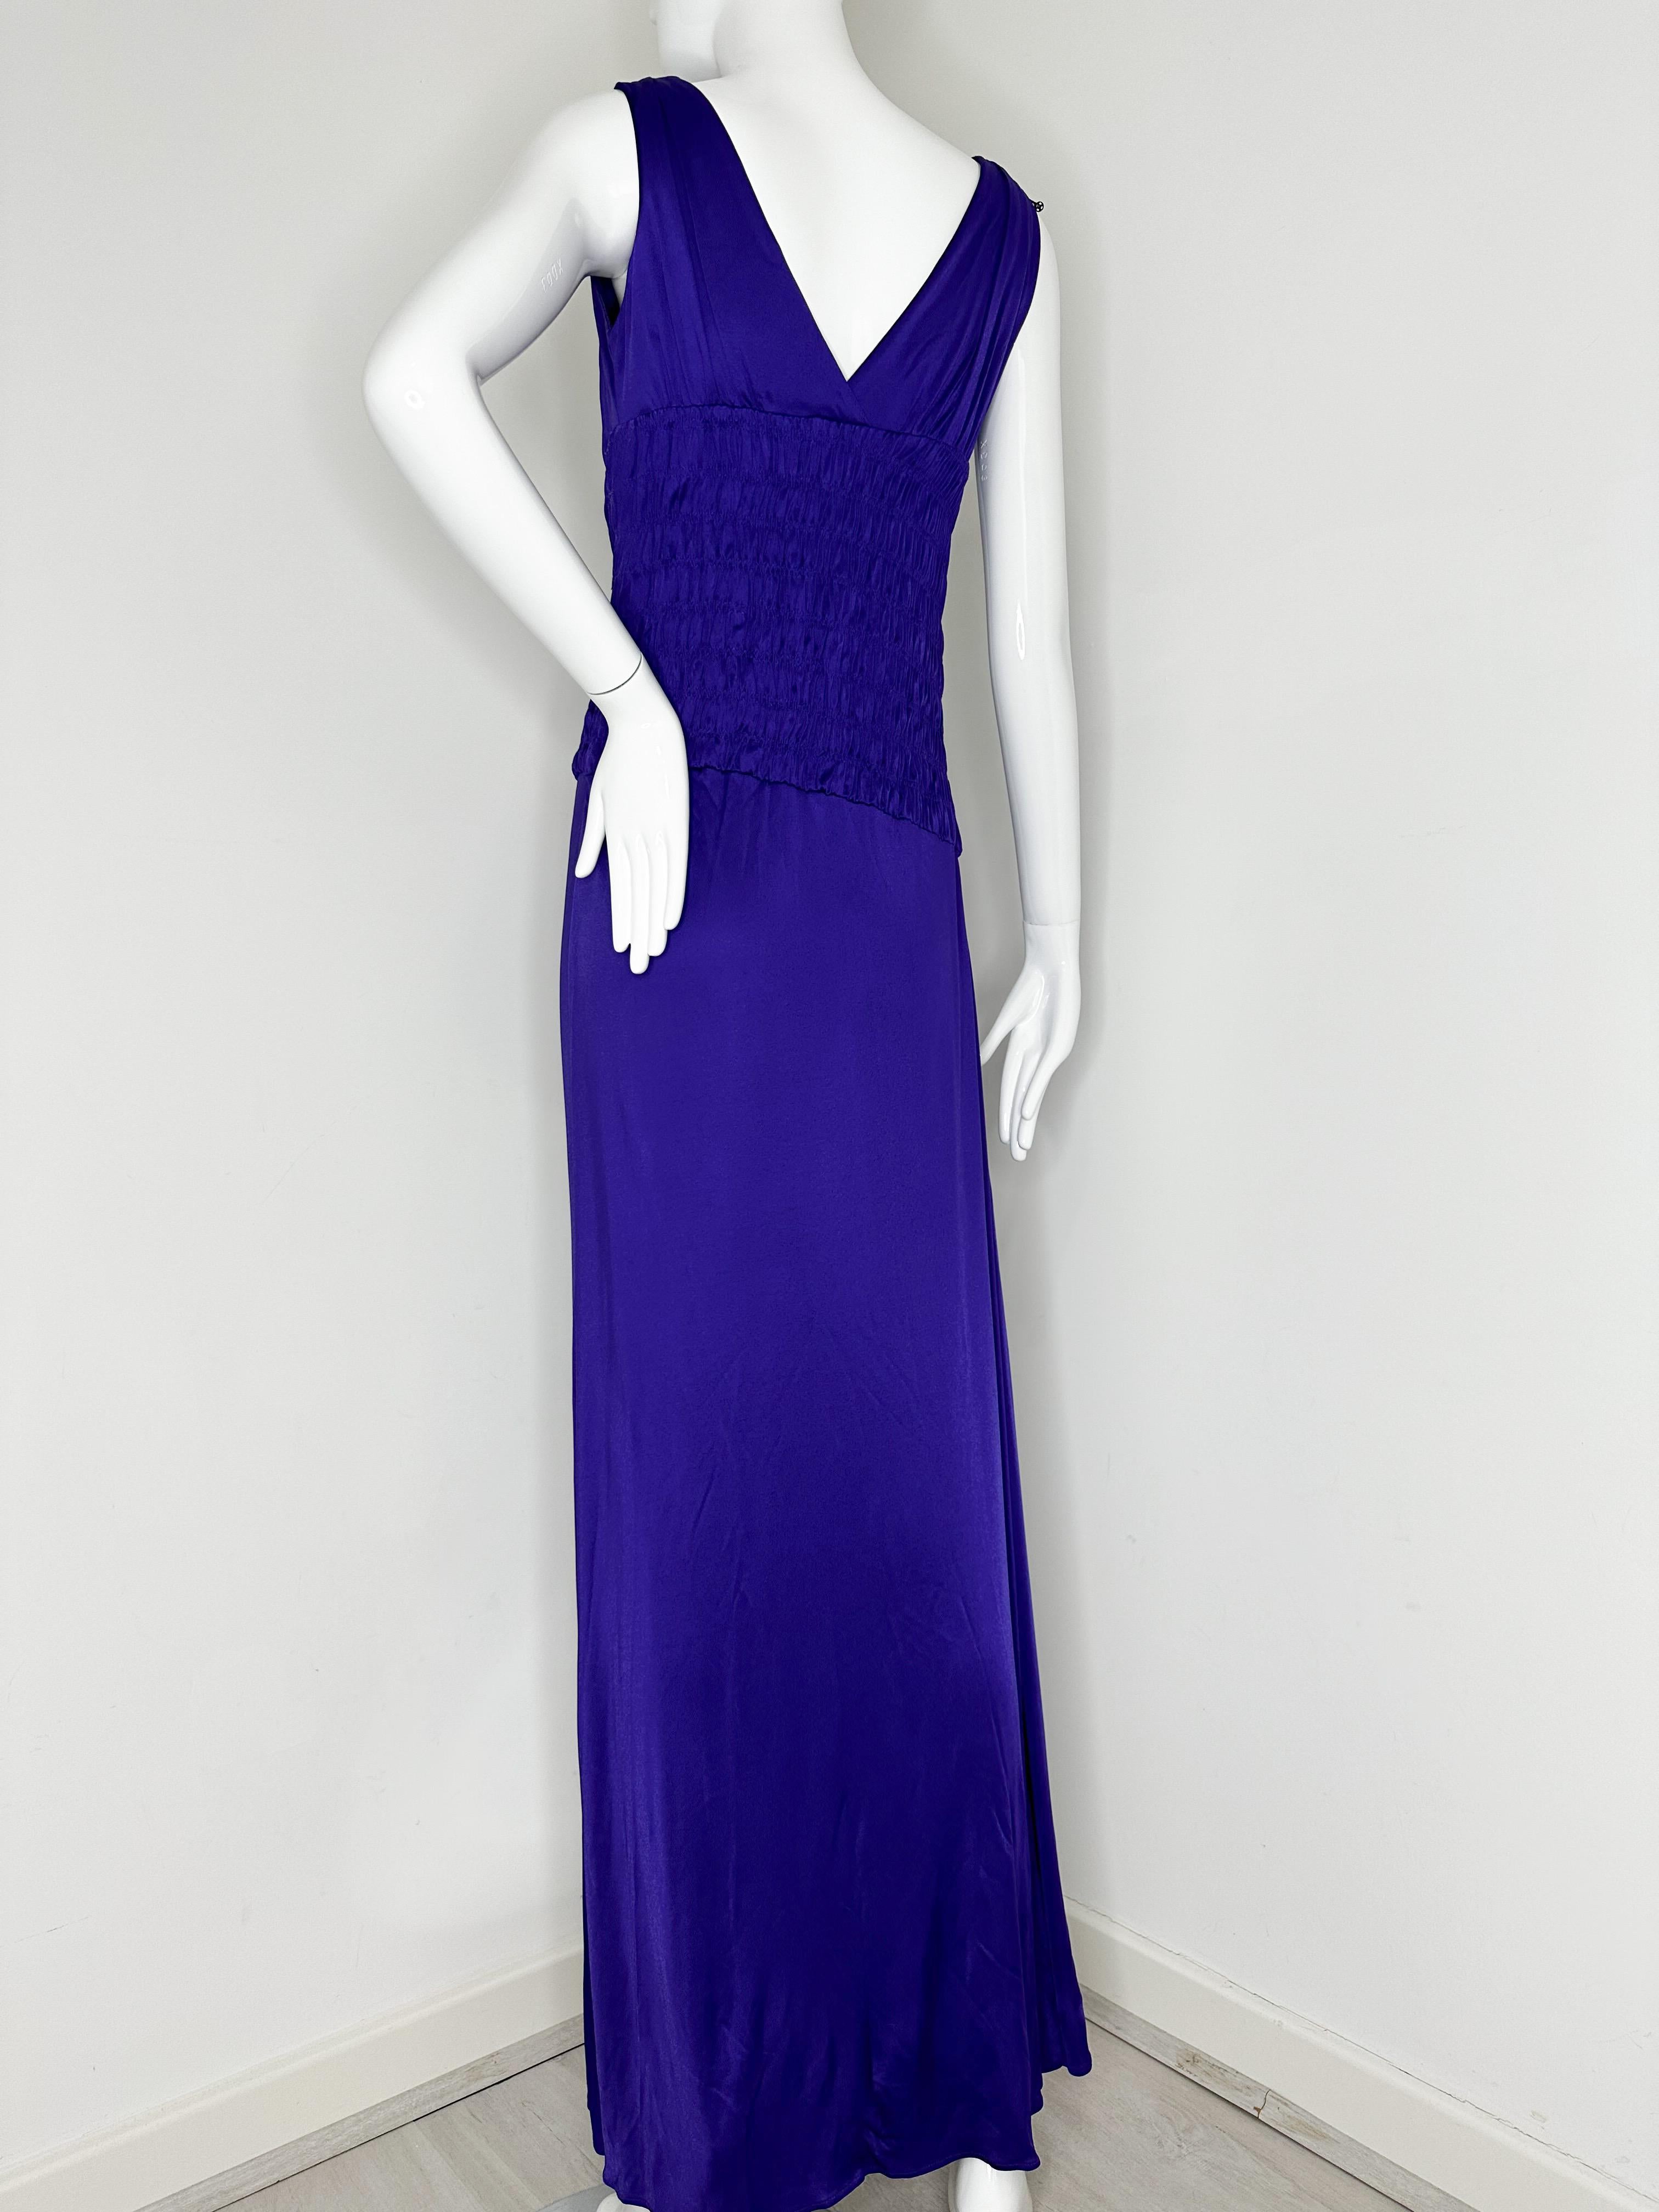 Christian Dior purple gown In Excellent Condition For Sale In Annandale, VA